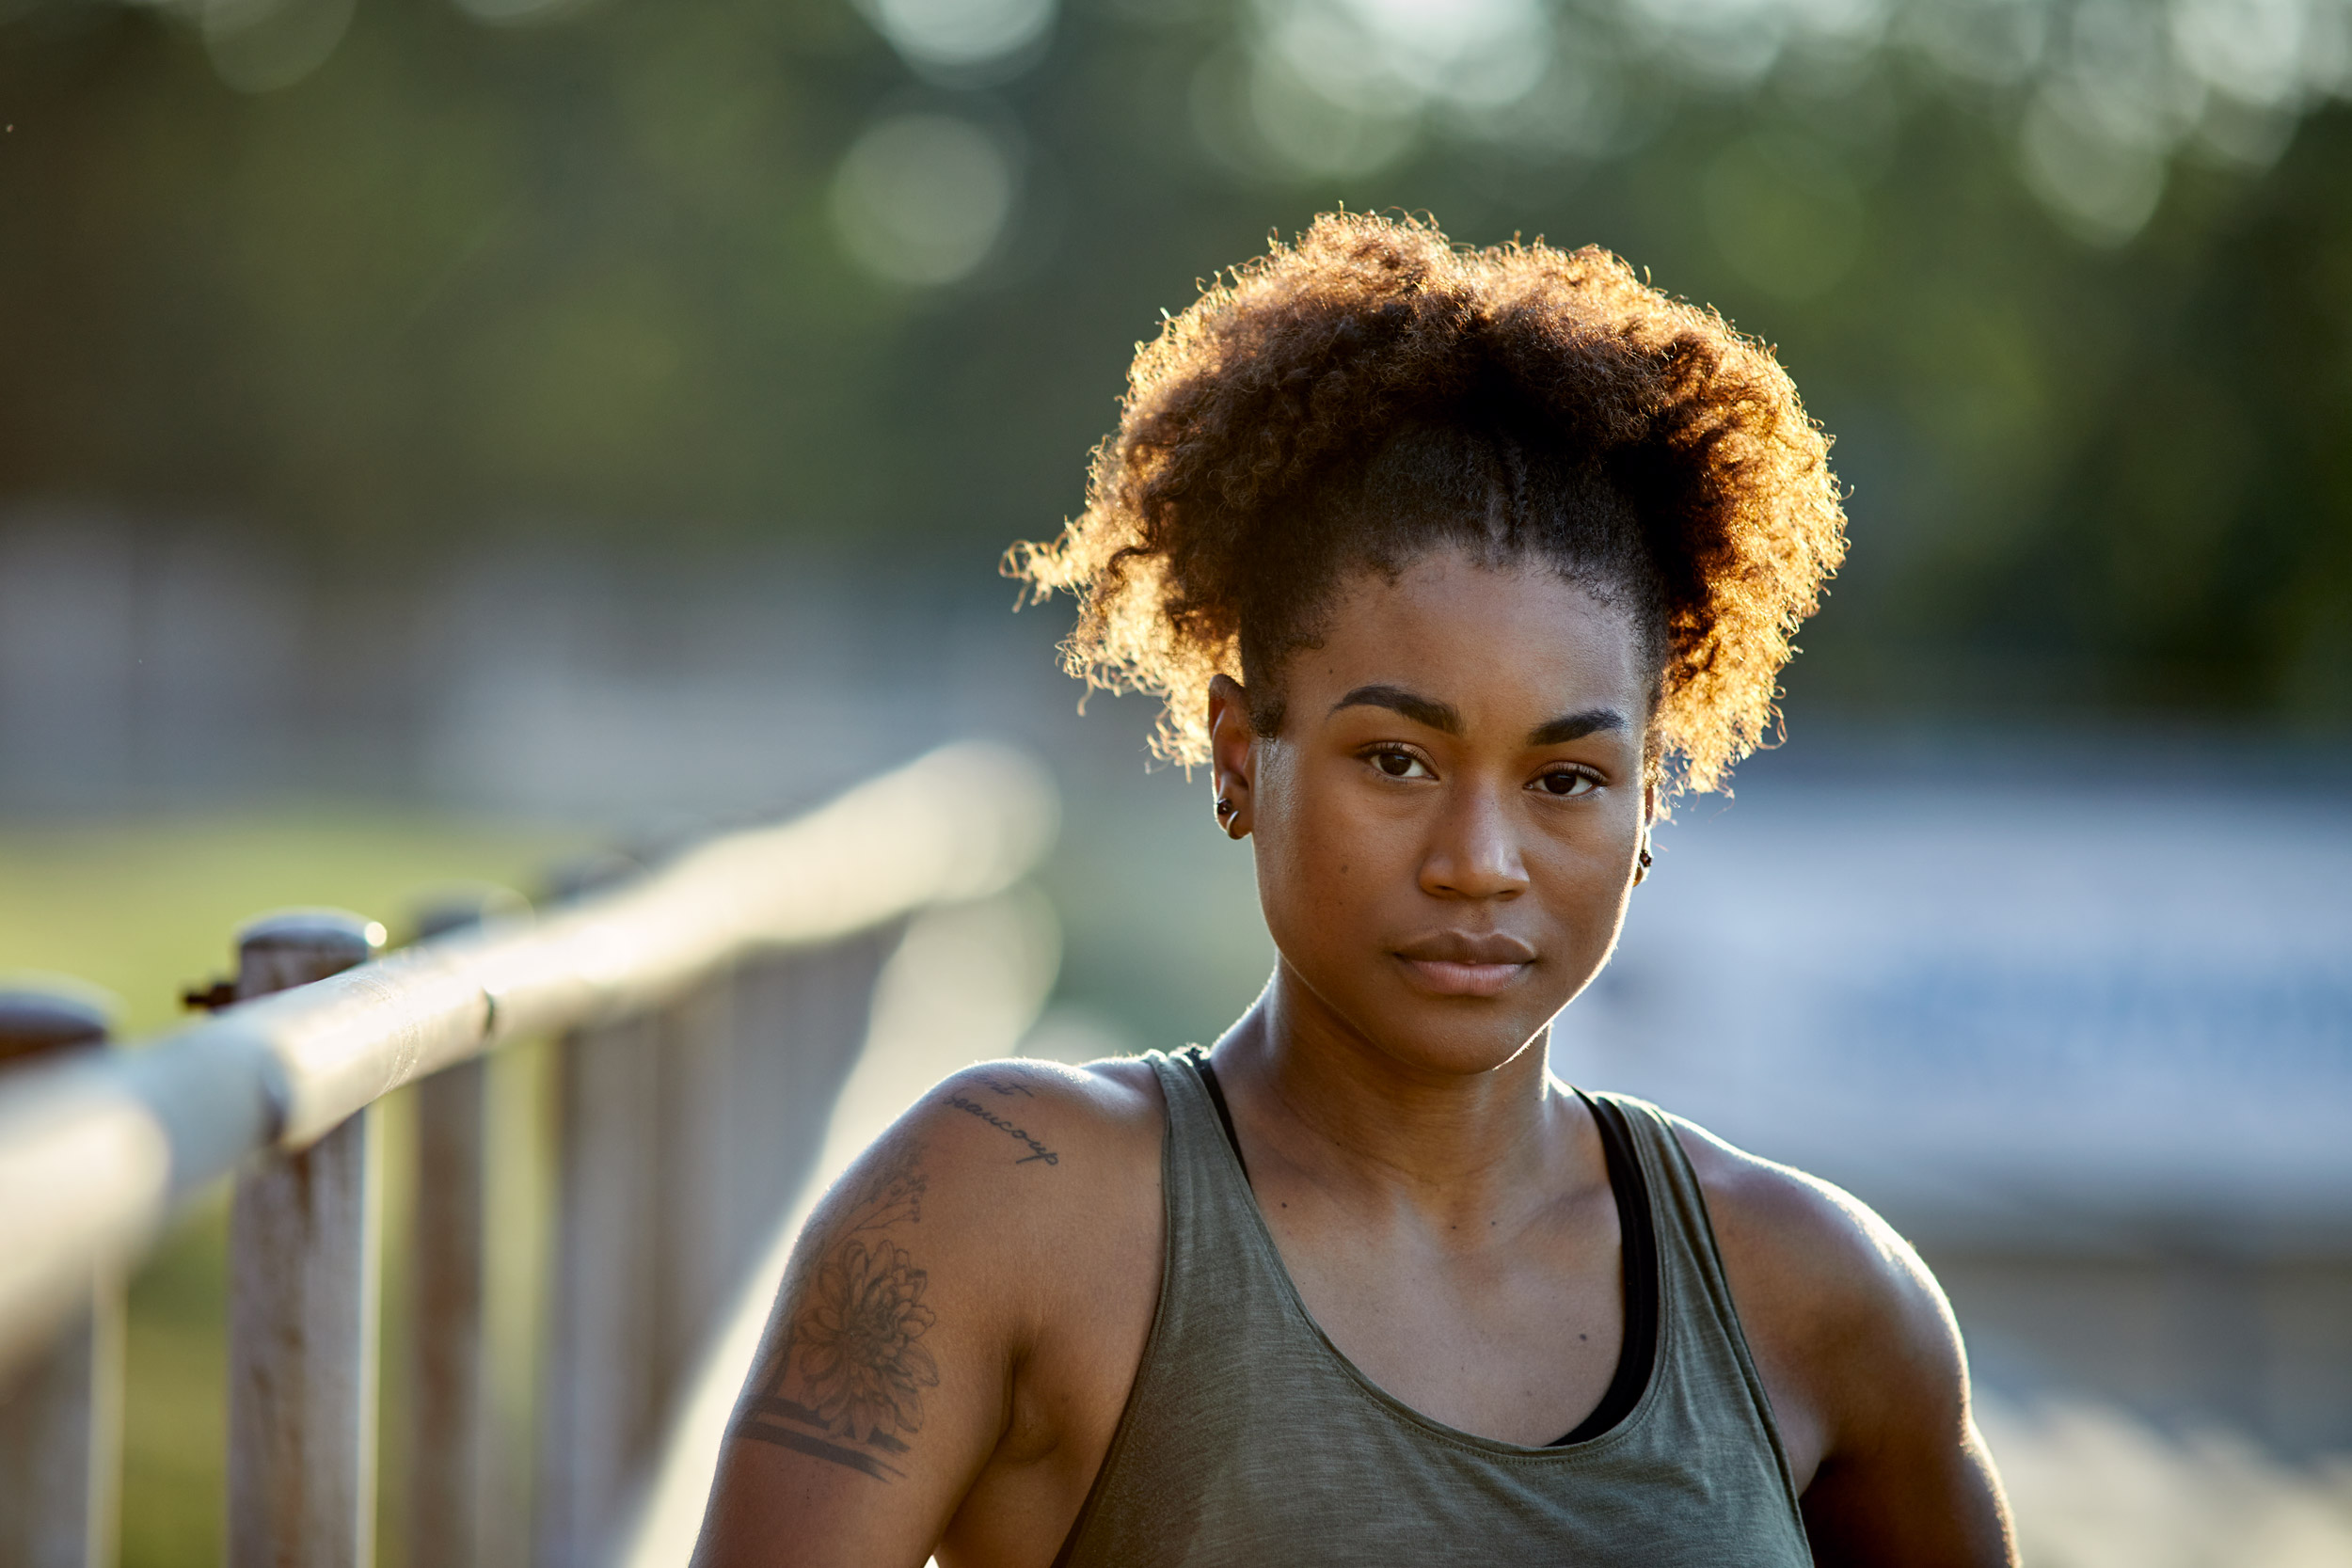 A female athlete poses for a portrait after an intense workout.